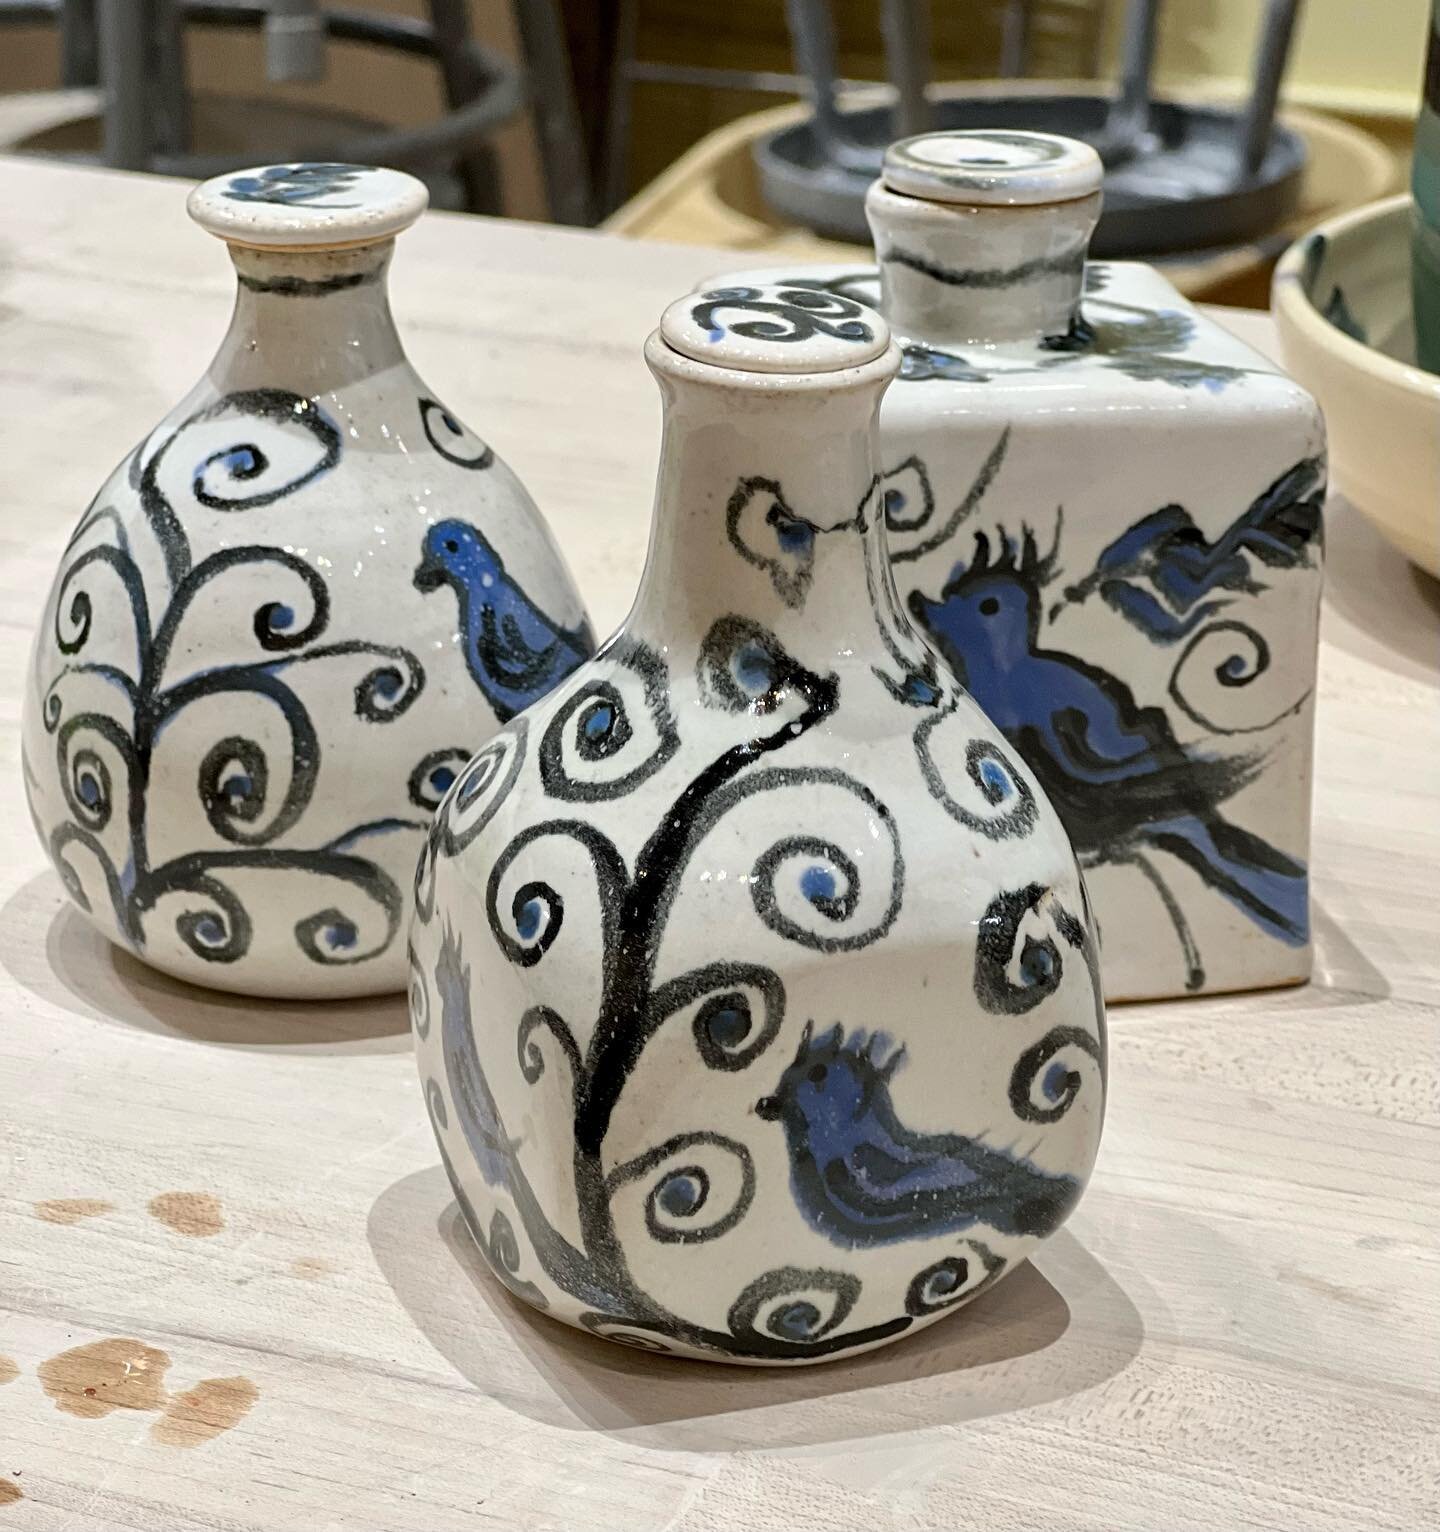 Success stories from a recent kiln unloading.
Beautiful bottles by @sieffe who was inspired by seeing an antique Iznic bottle in a friend's house.
The cat sculpture was created by @gabrieljferraro and inspired by Smokey Jones 
#pottery #ceramicsart #